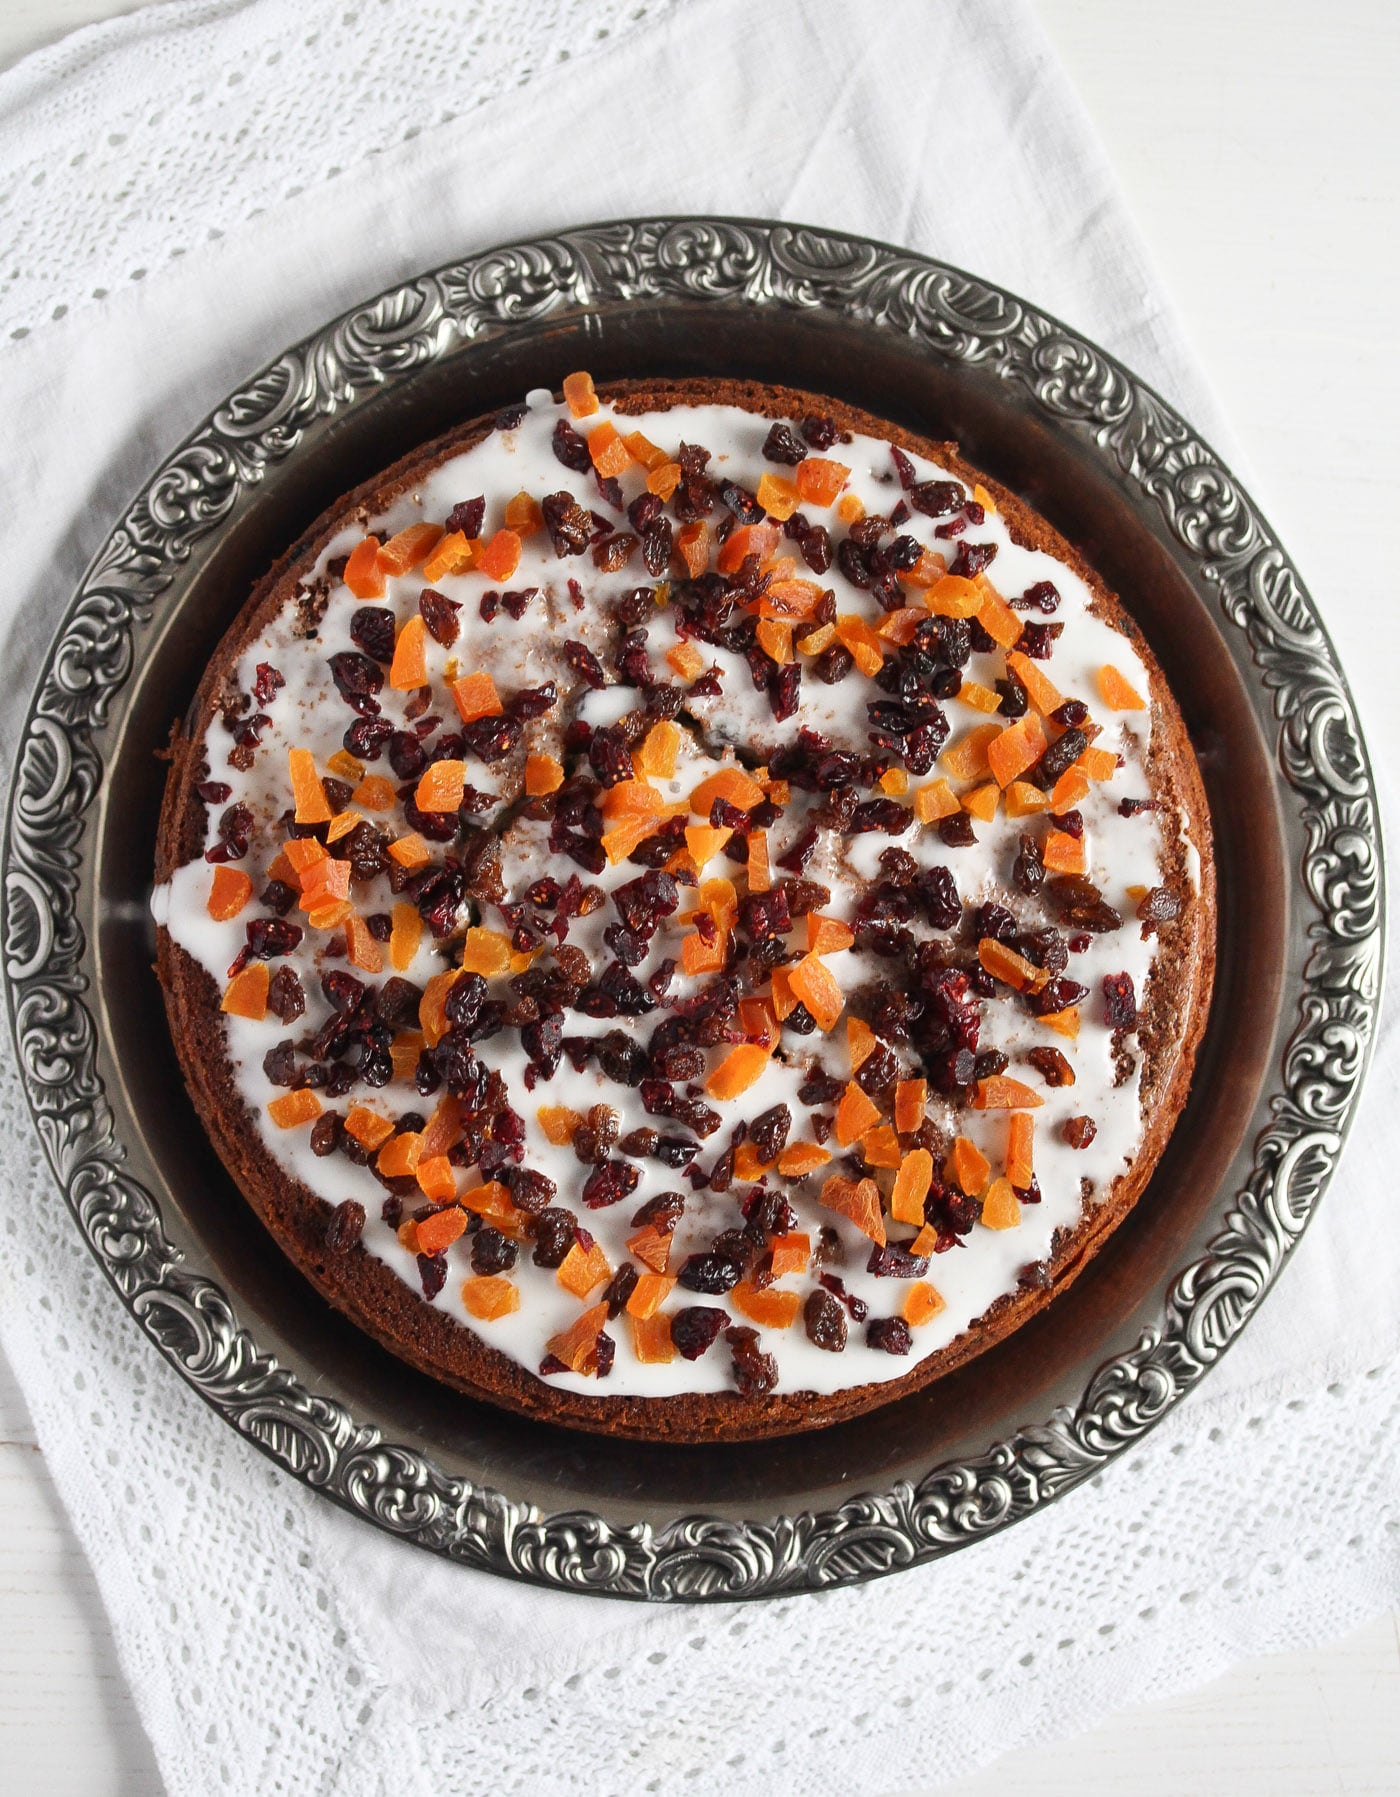 pumpkin fruit cake with icing and dried fruit topping